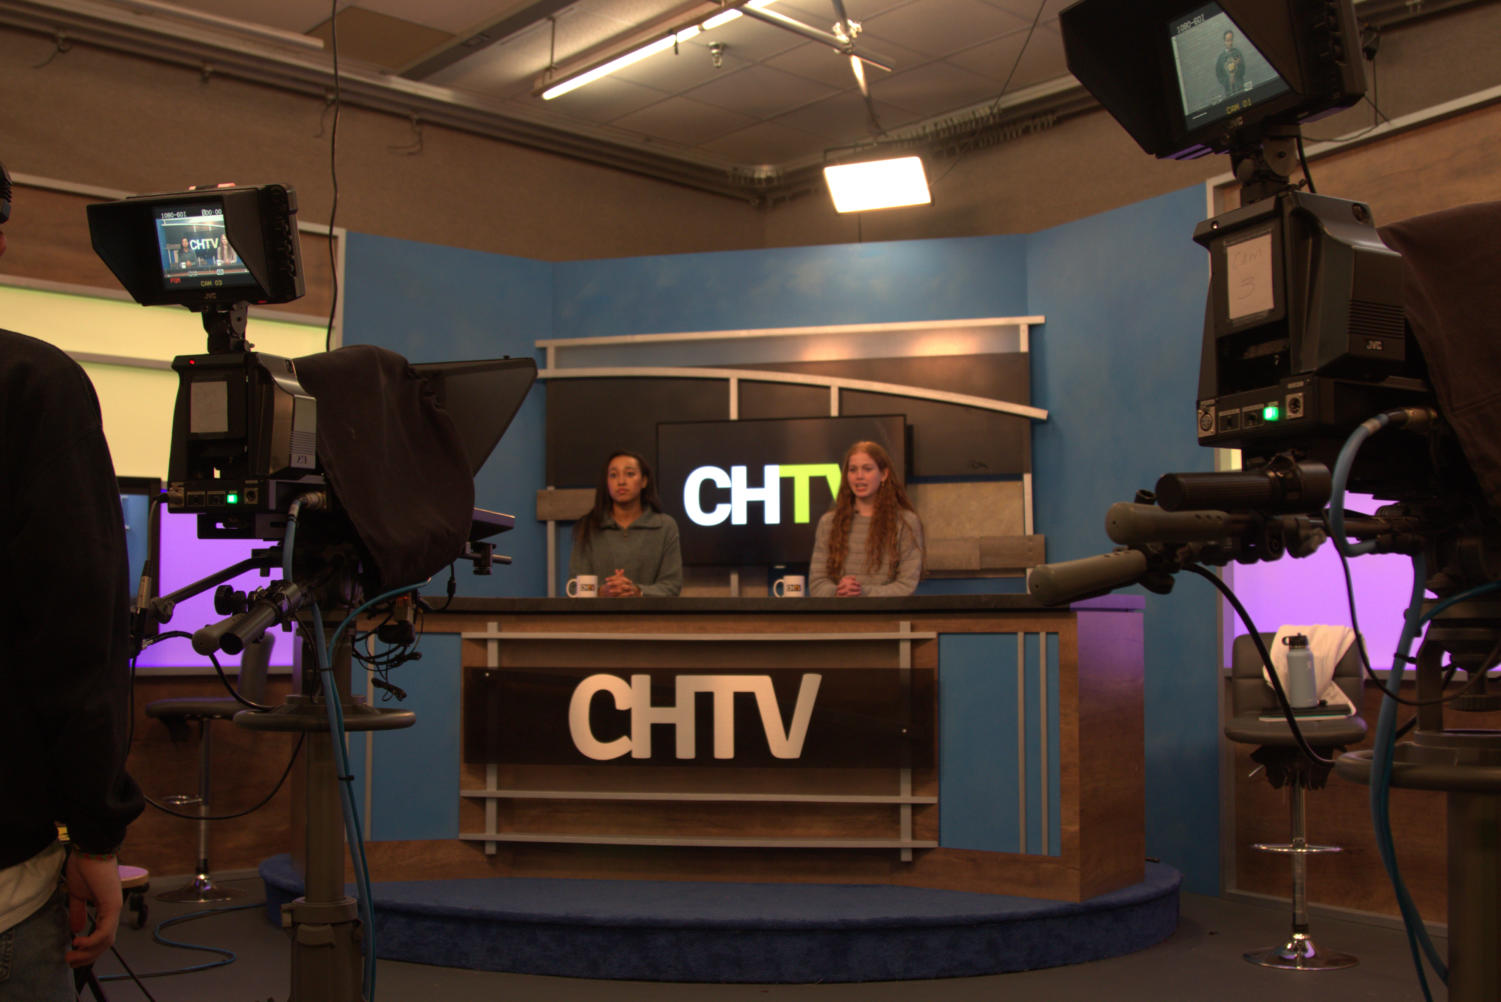 Ireland and Hannah sitting at the CHTV news desk